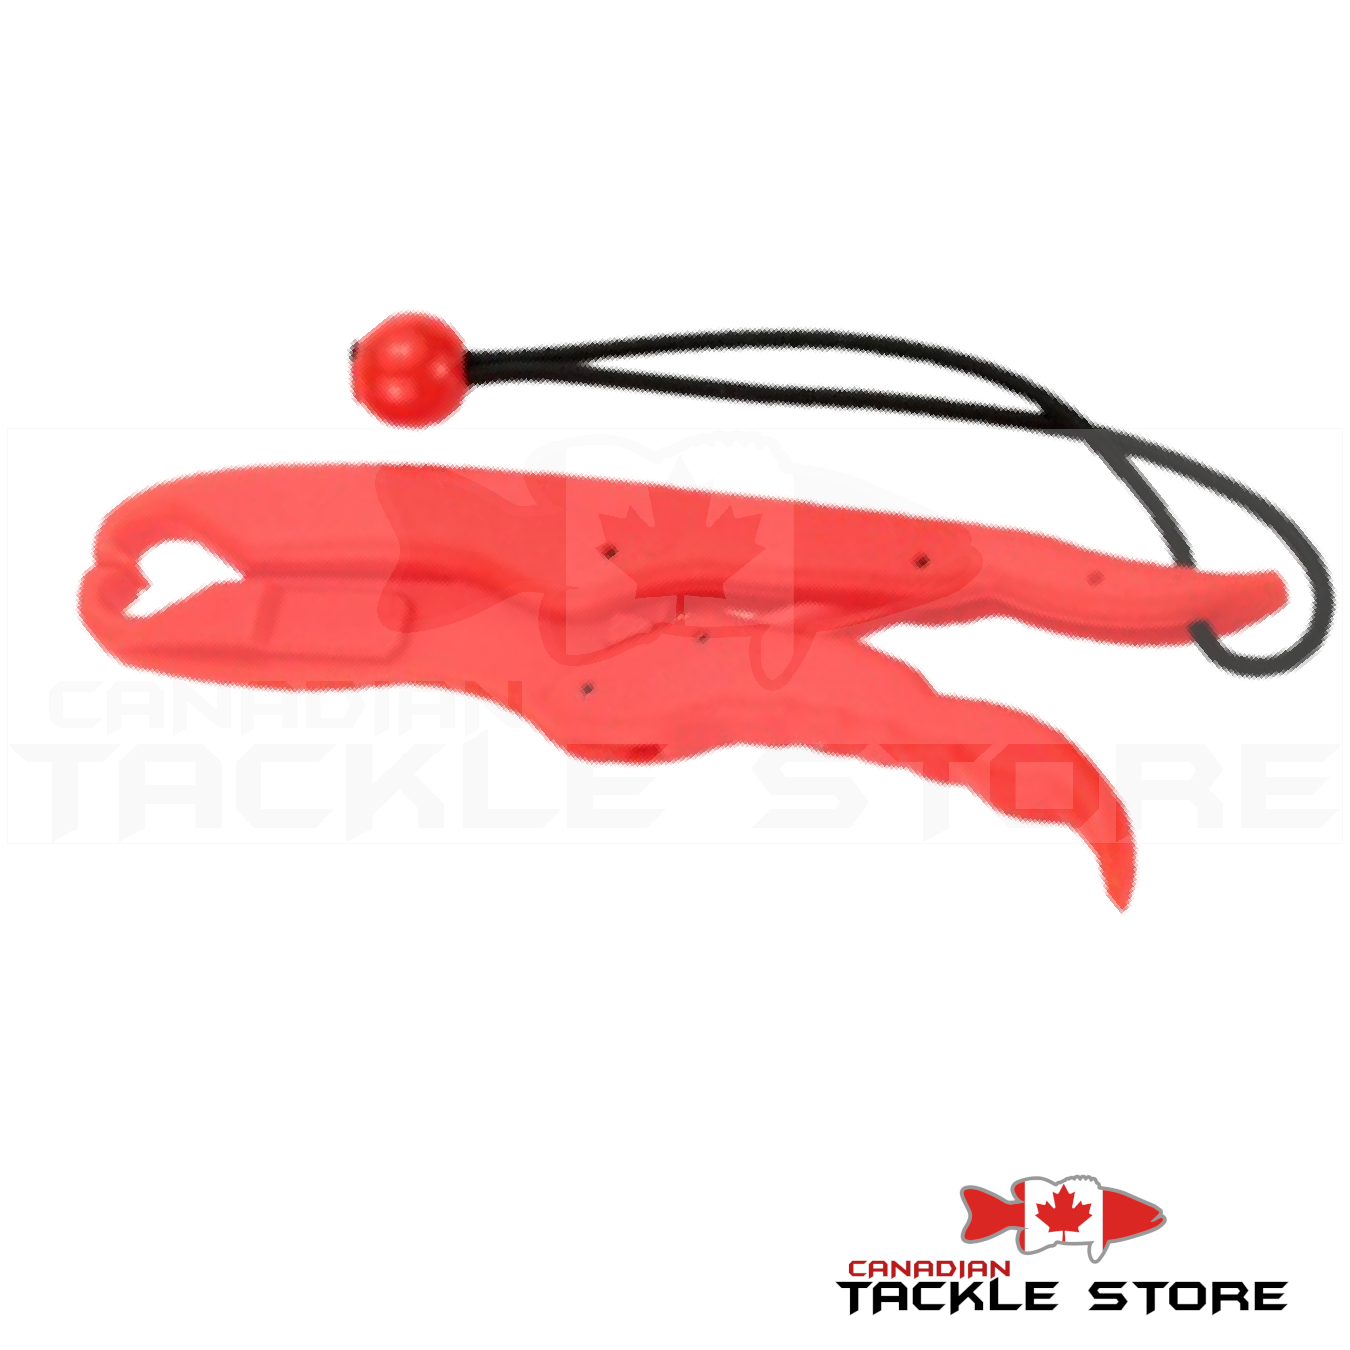 Pliers – Canadian Tackle Store